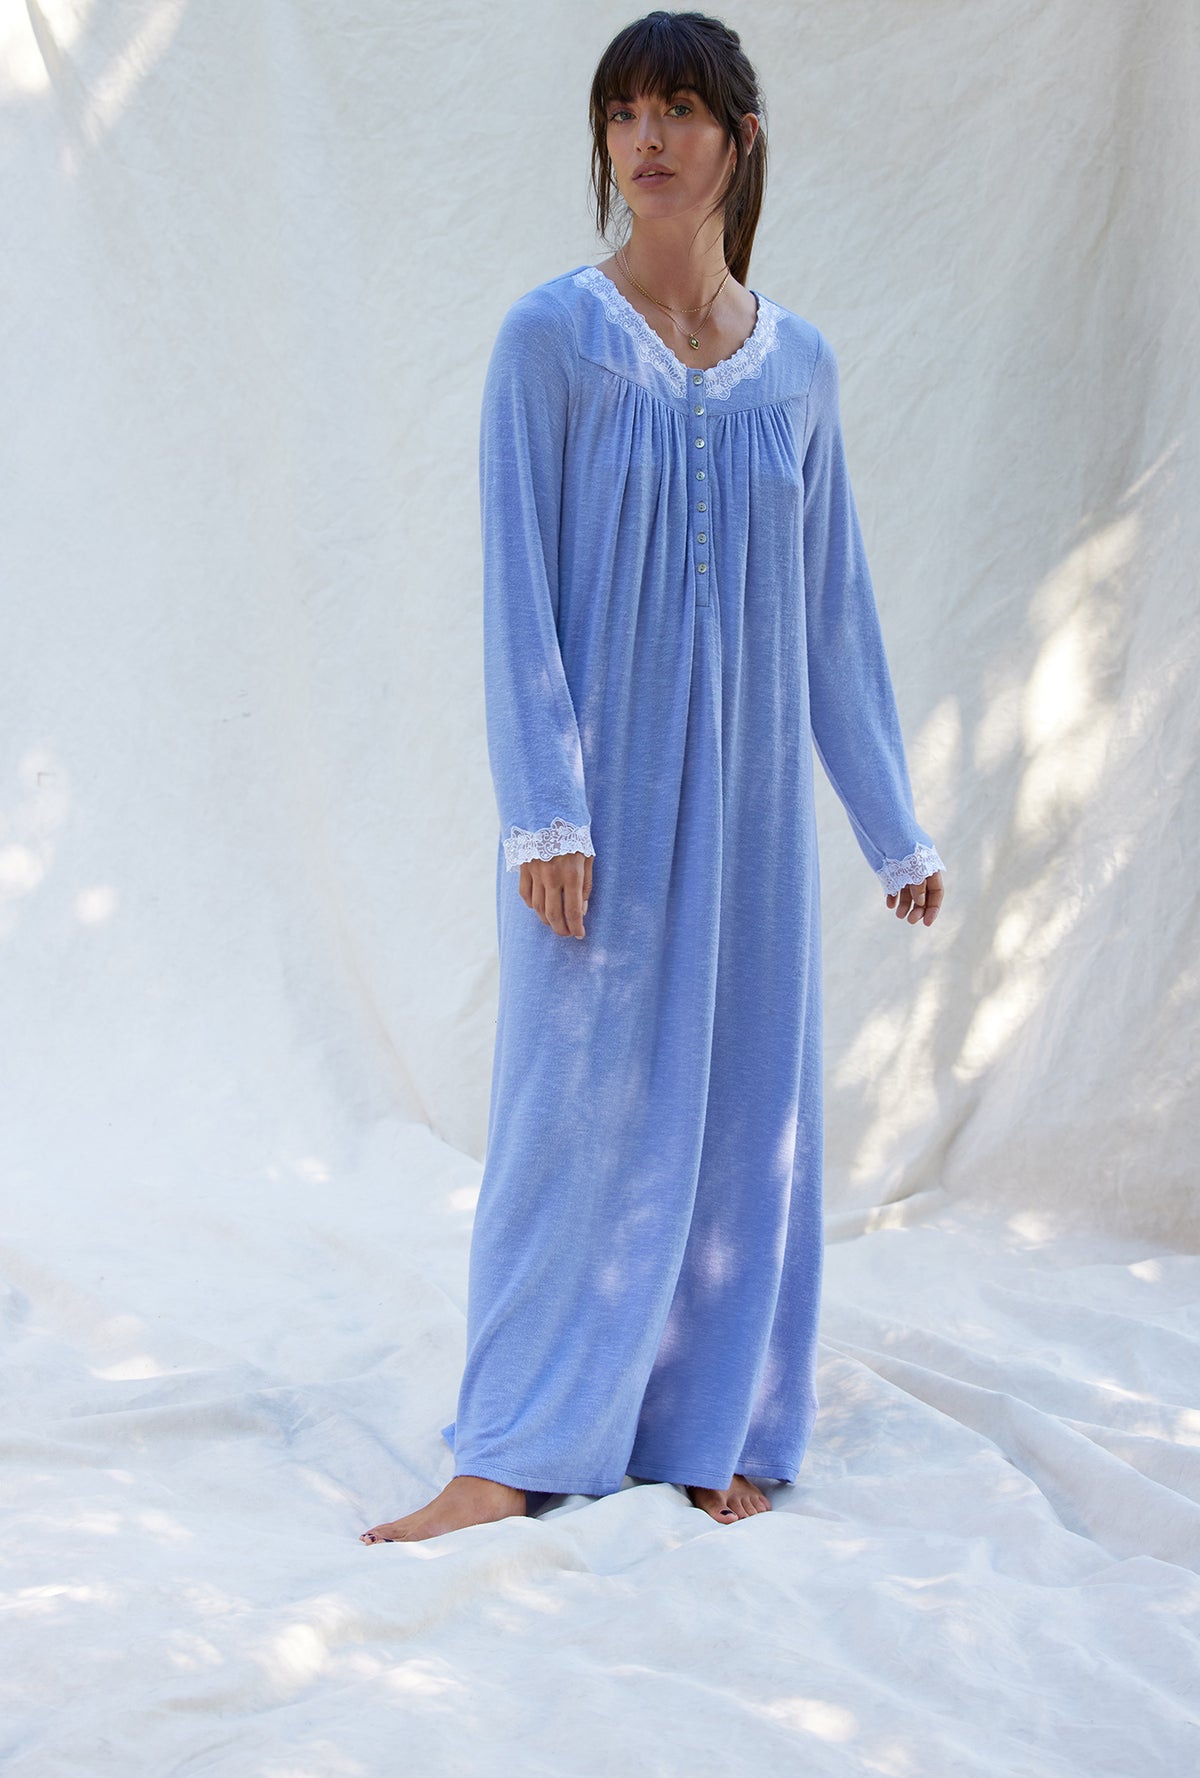 A lady wearing a blueberry long sleeve long nightgown.